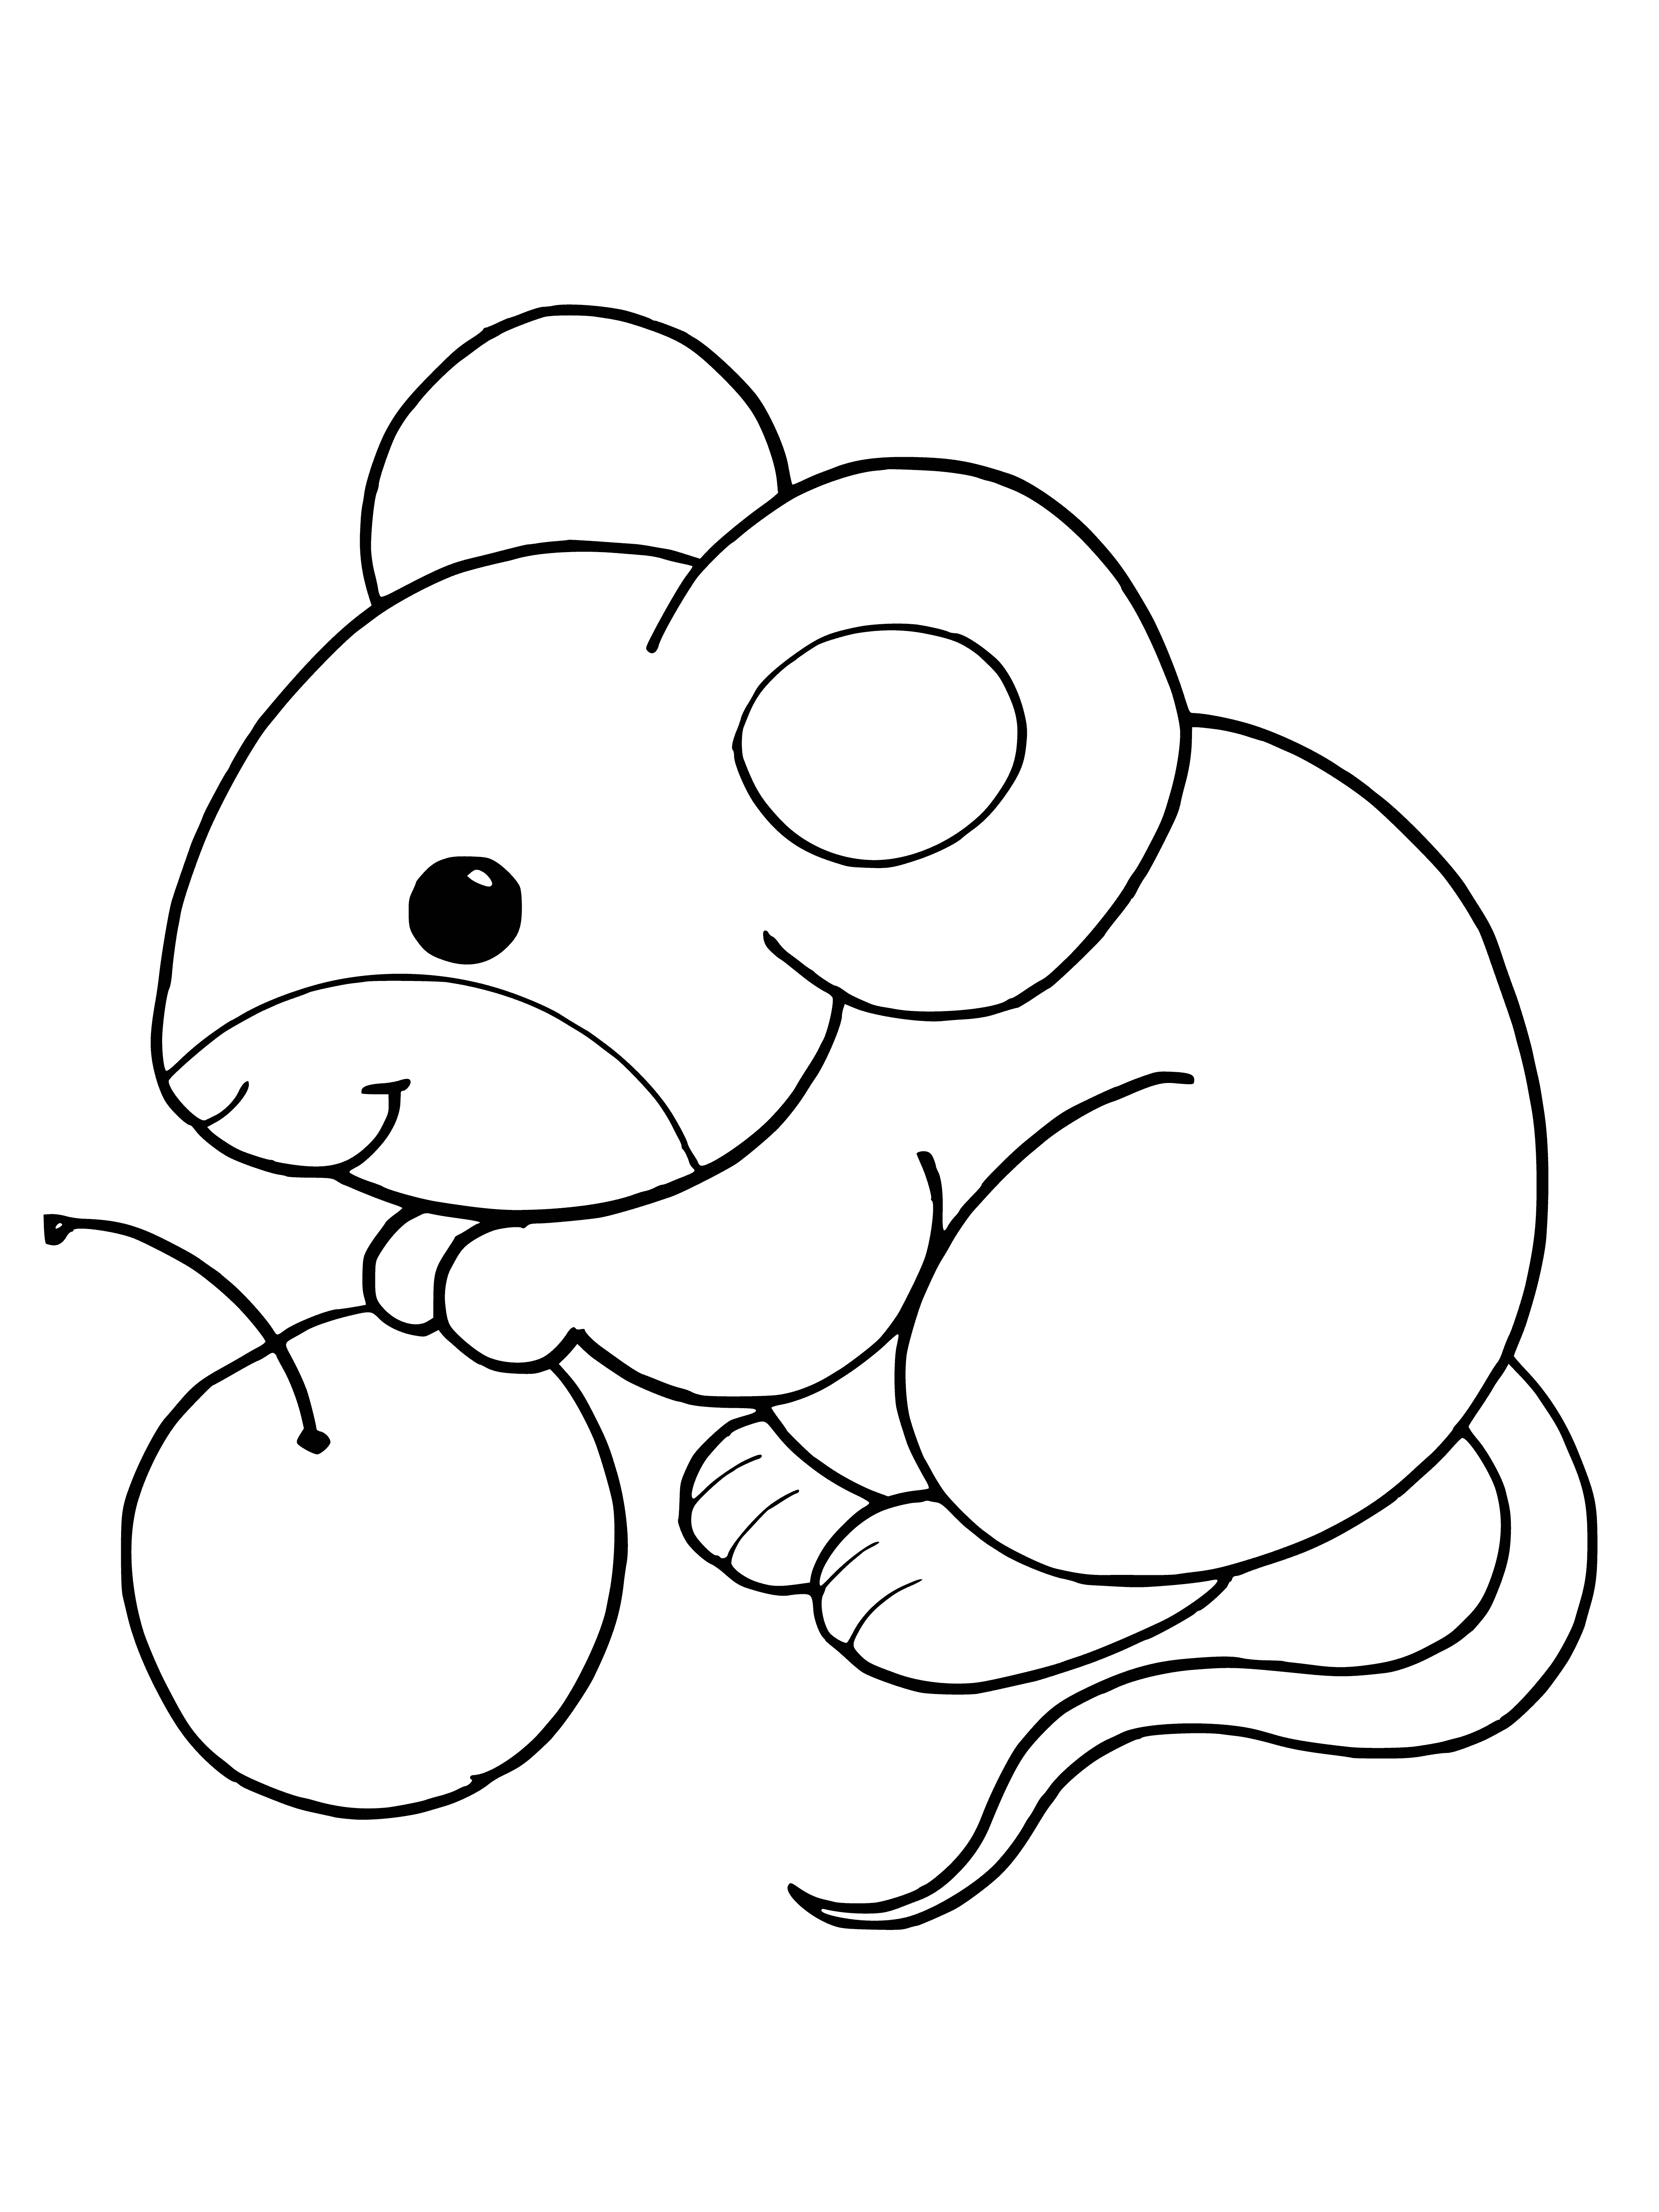 Rat nibbling on apple: long tail, pointy ears, beady eyes.